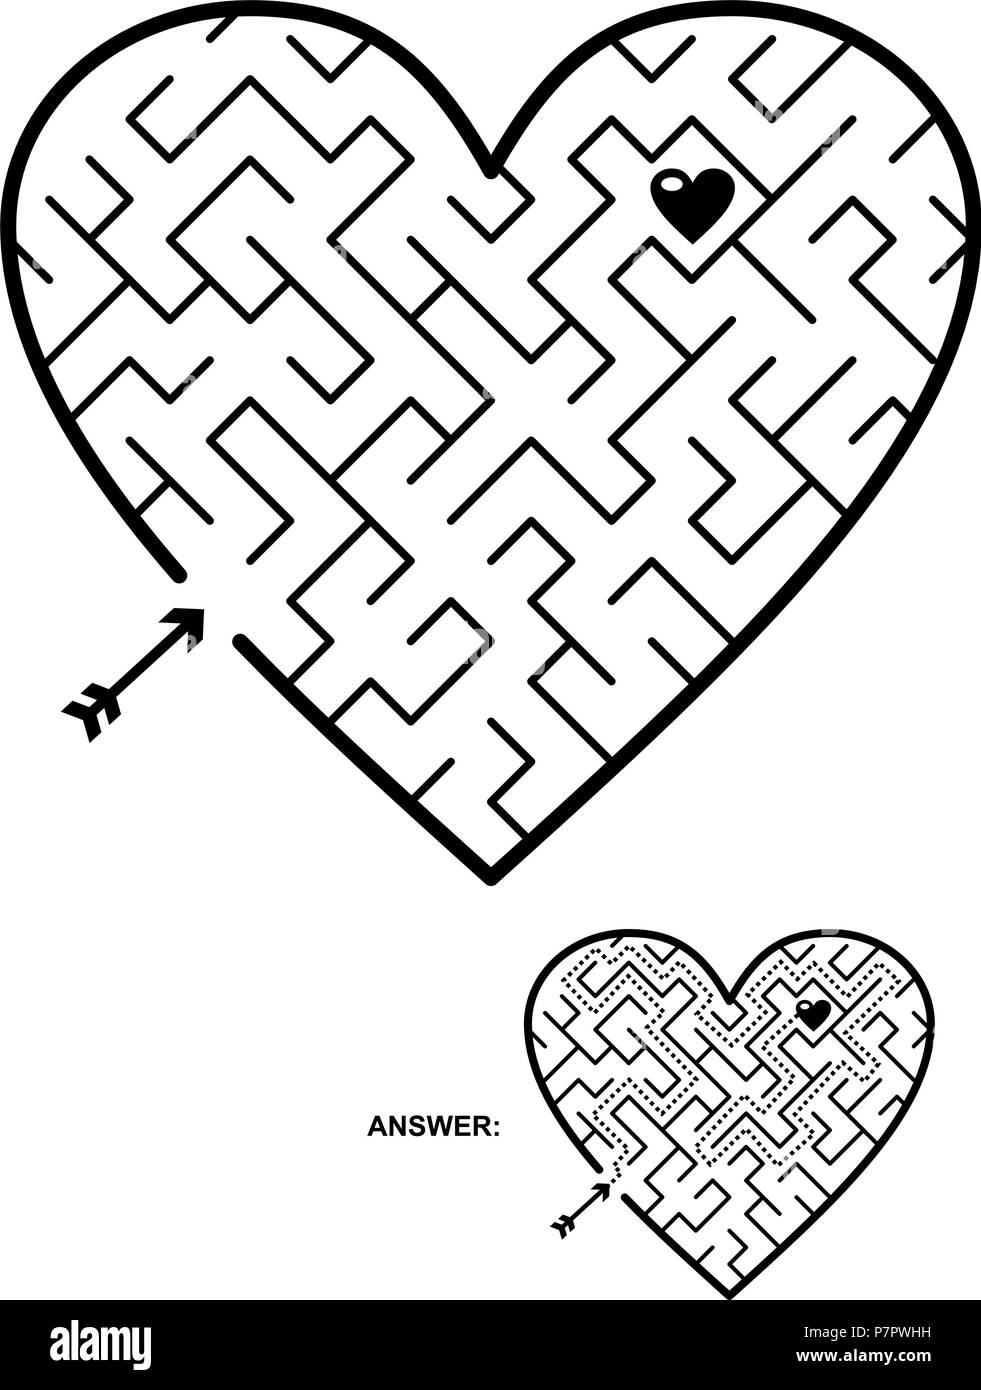 Mazes Heart Valentines Maze Puzzles Printable Coloring Pages Find Kids